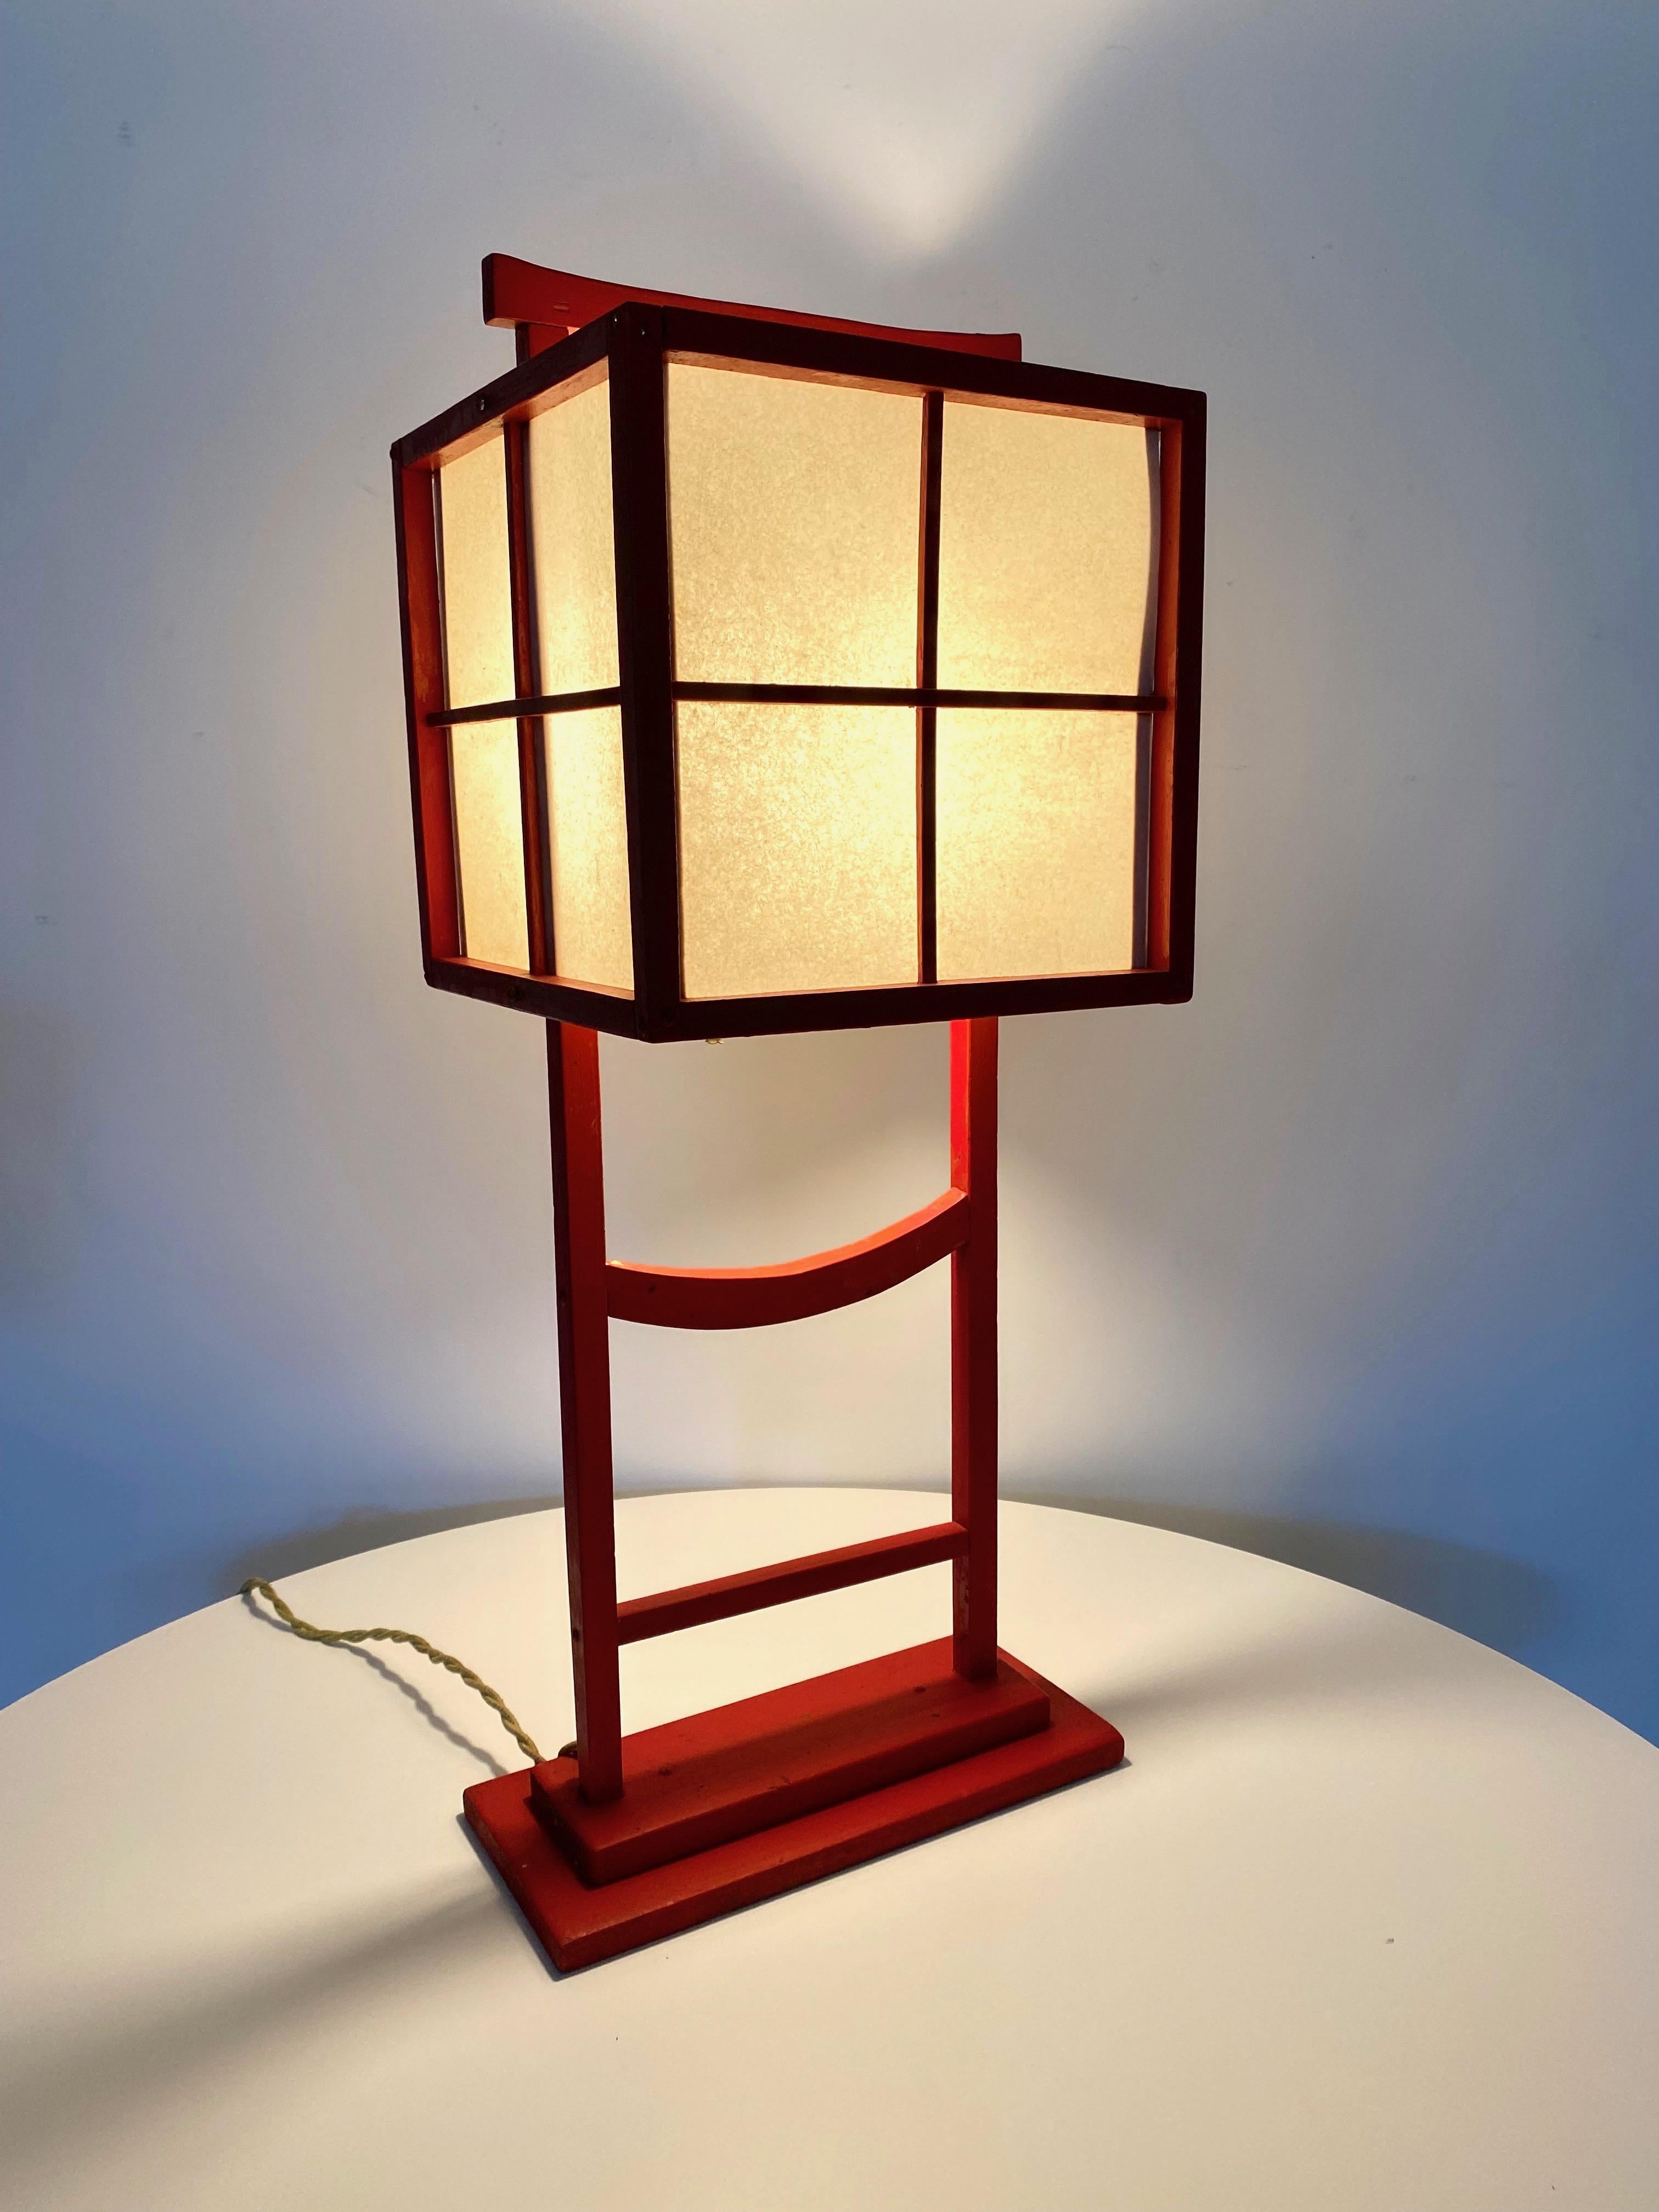 Andon table lamp hand crafted sometime in the early 1950s signed on the bottom Tomiko. Made entirely by hand with red painted wood frame and fiberglass parchment panels. Has a warm naive quality to this traditional style of Japanese lighting.